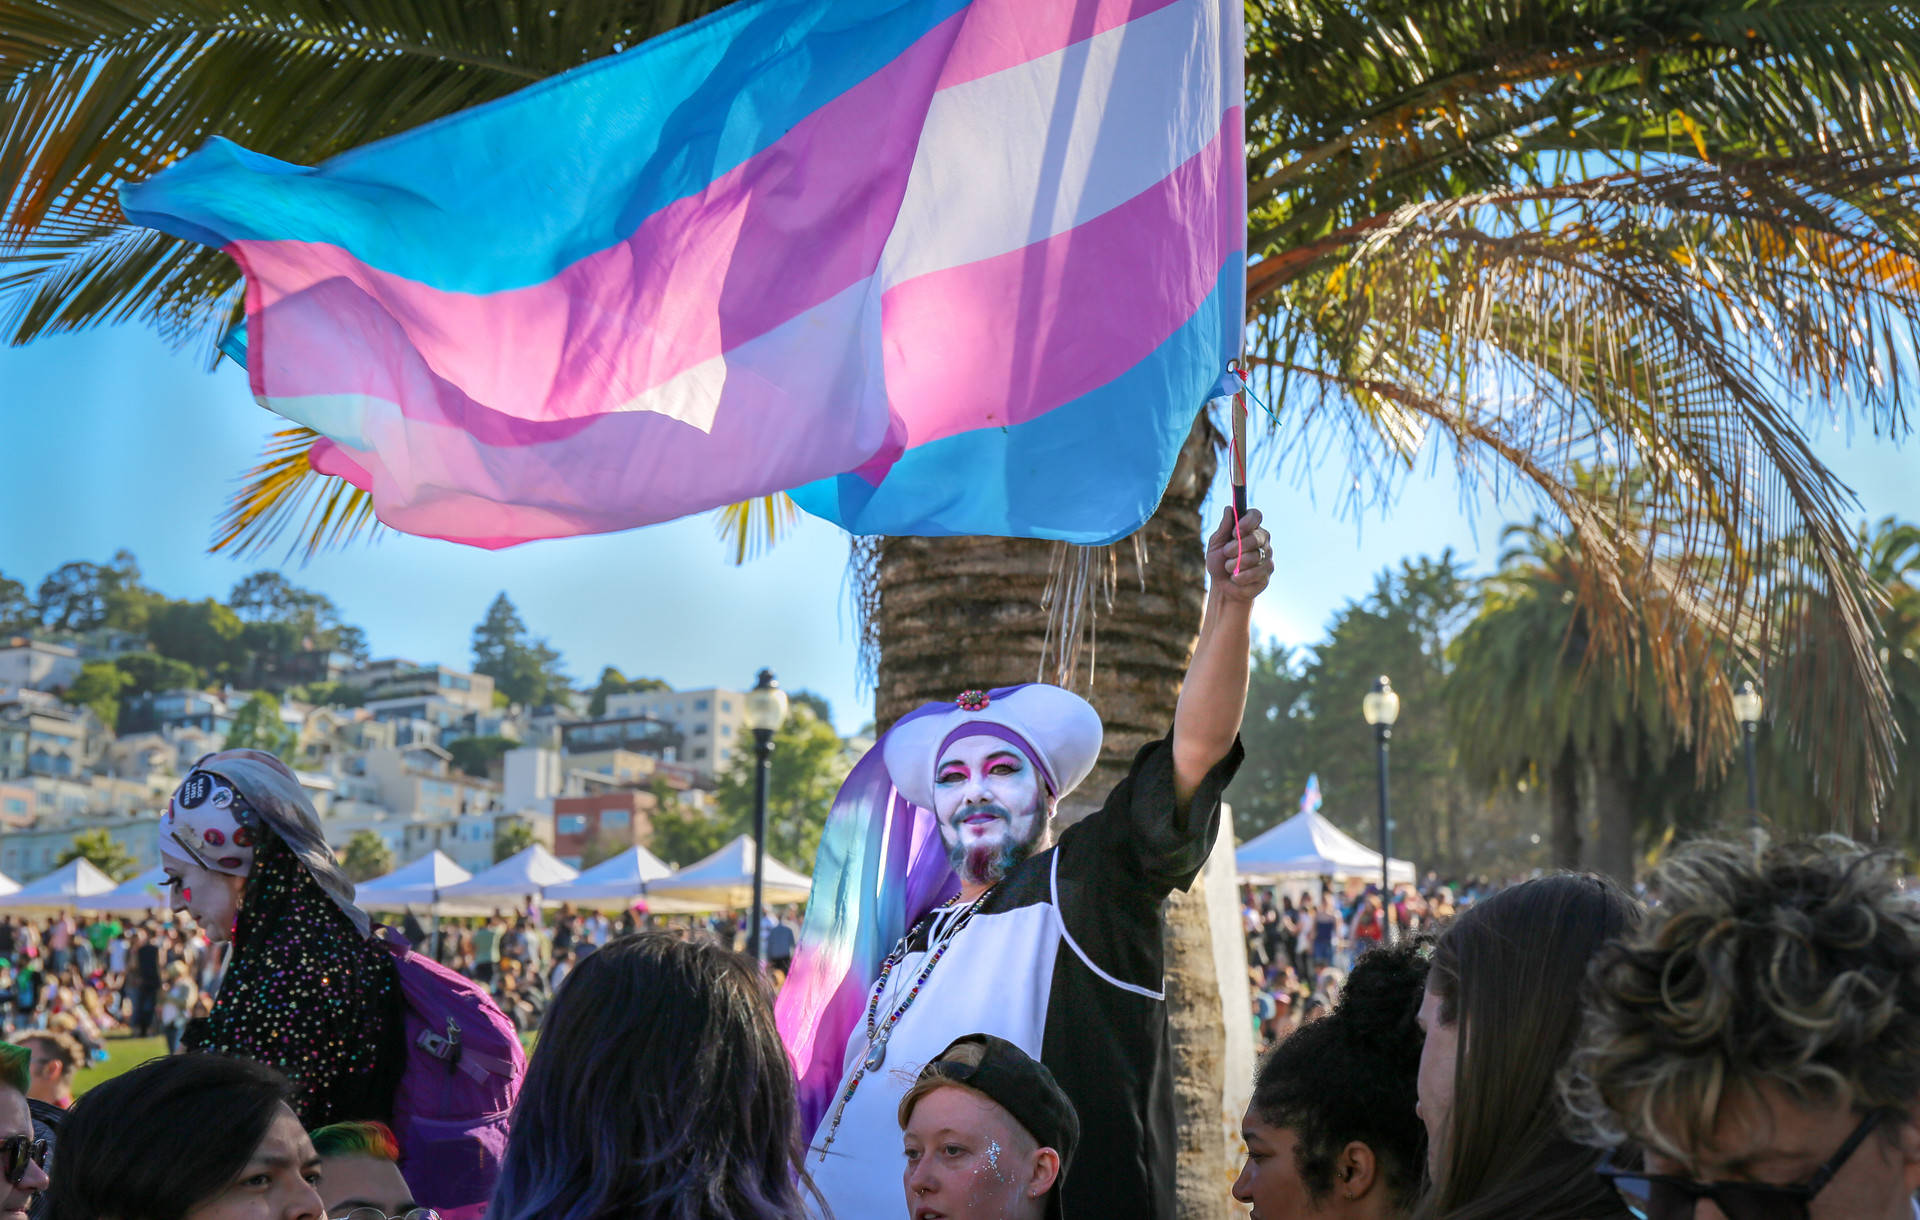 The transgender pride flag is held high during the Trans March at Dolores Park on June 28, 2019. Sruti Mamidanna/KQED